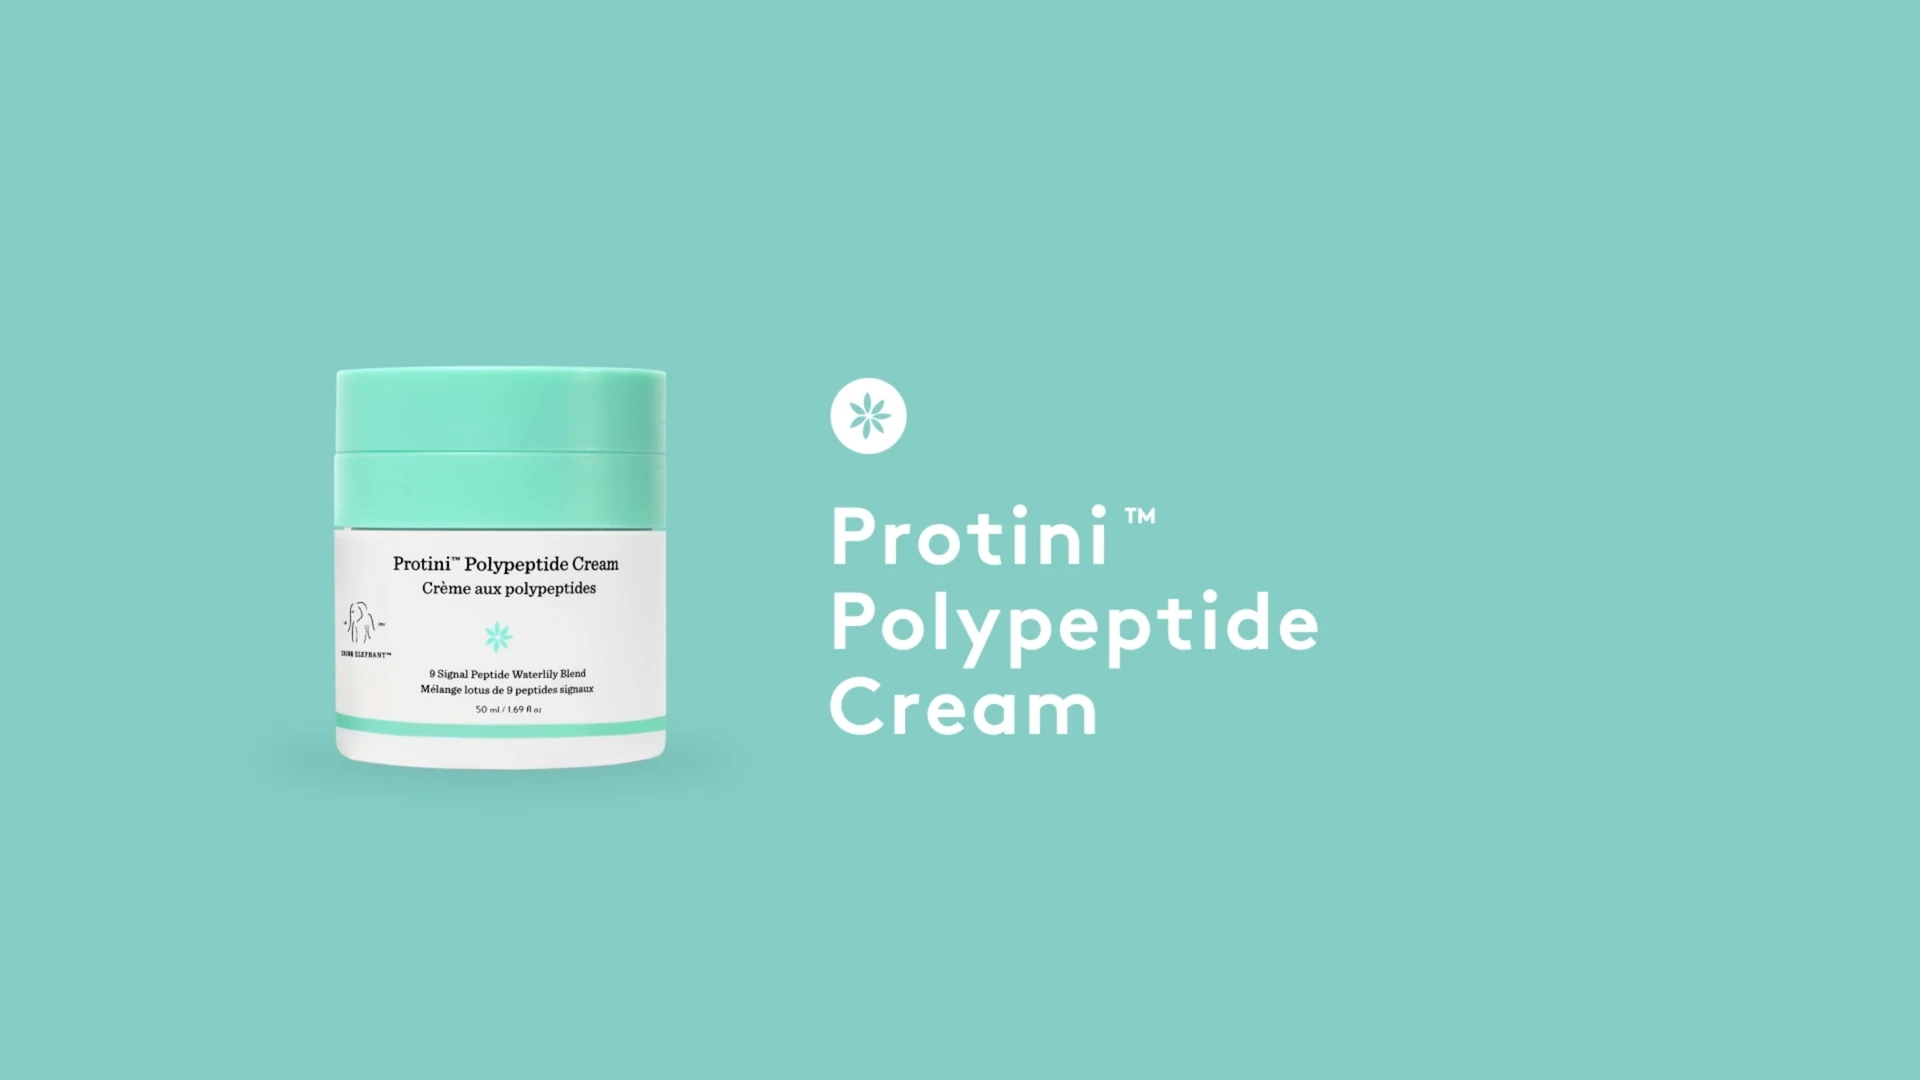 video detailing the benefits of Protini Polypeptide Cream